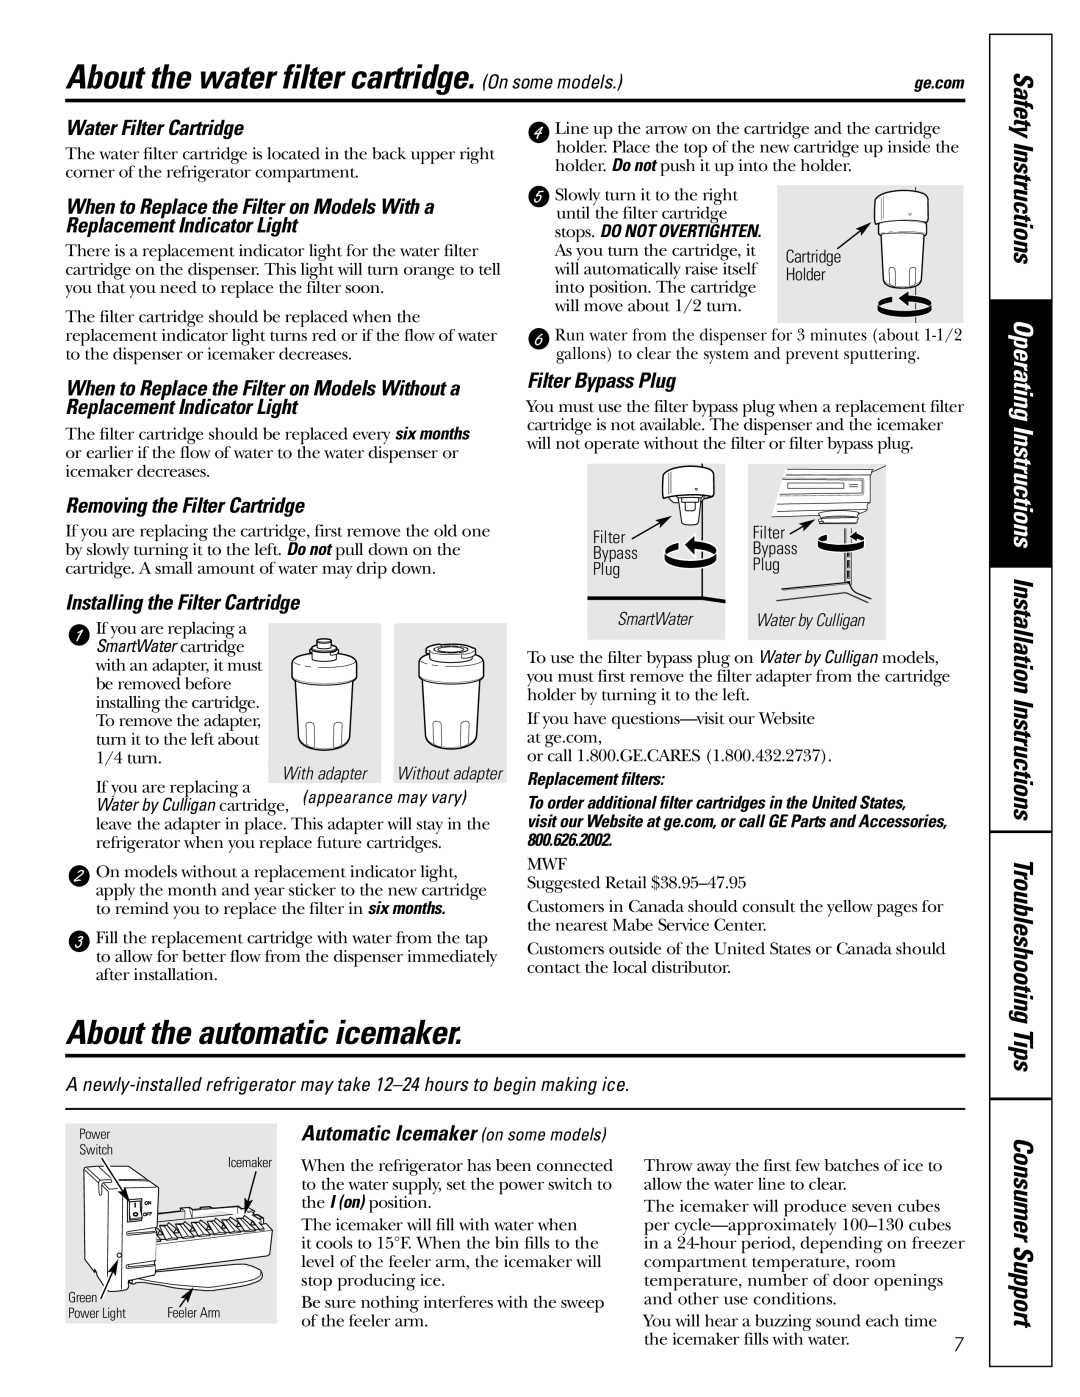 GE 20 About the water filter cartridge. On some models, About the automatic icemaker, Tips, Instructions Operating 